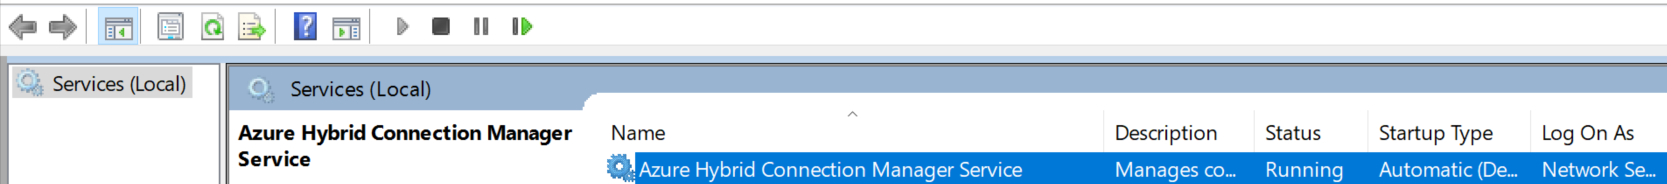 Azure Hybrid Connection Manager Servce